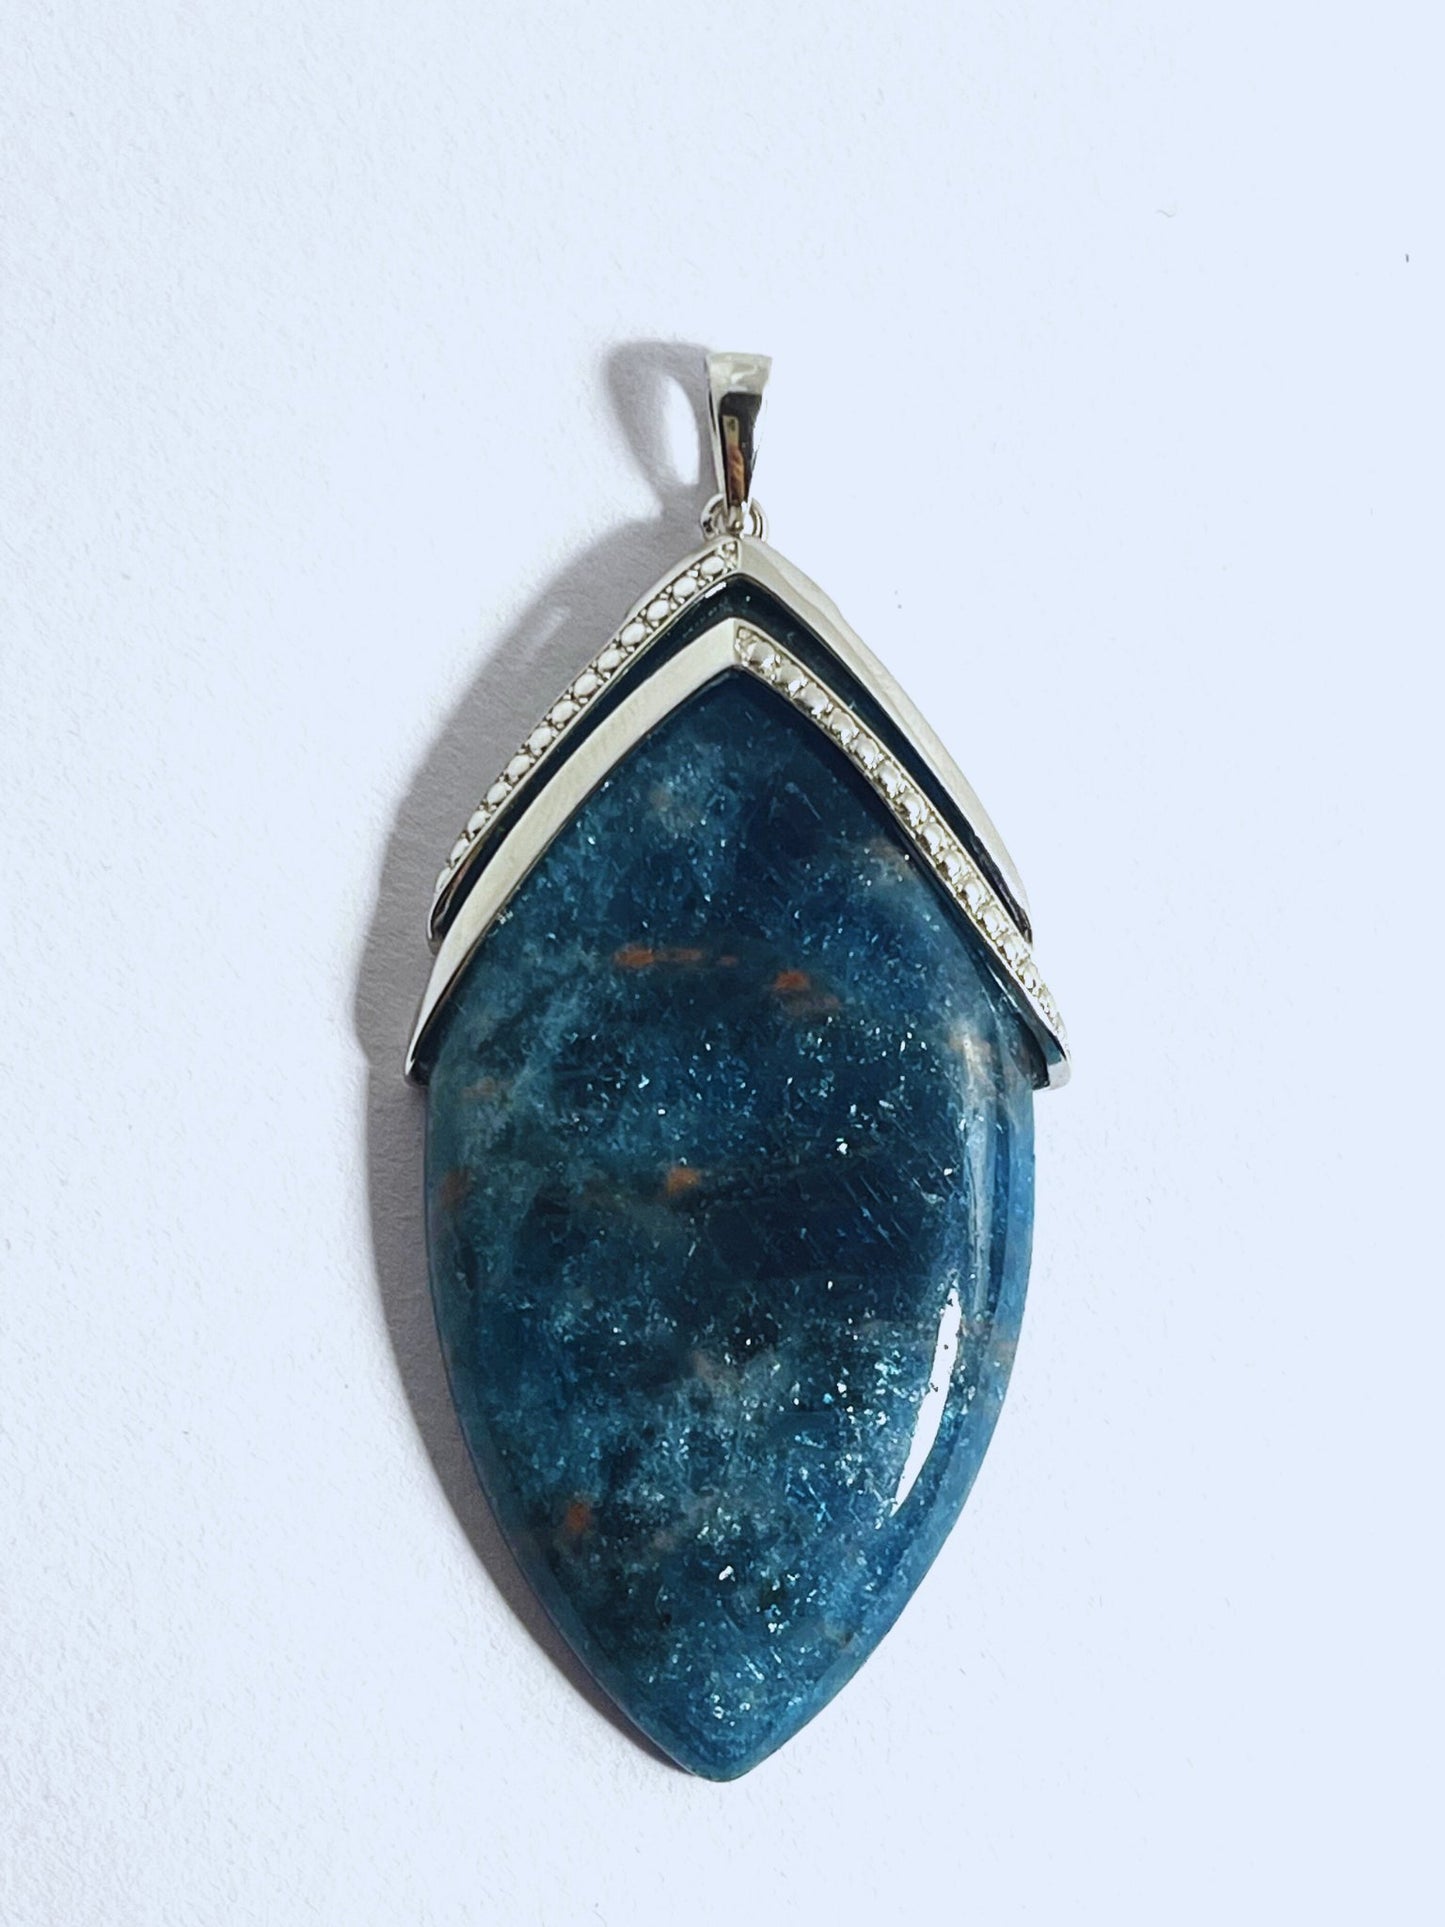 Sterling Silver Stunning Statement Pendant - 109cts Madagascan Neon Apatite Marquise - Stellify